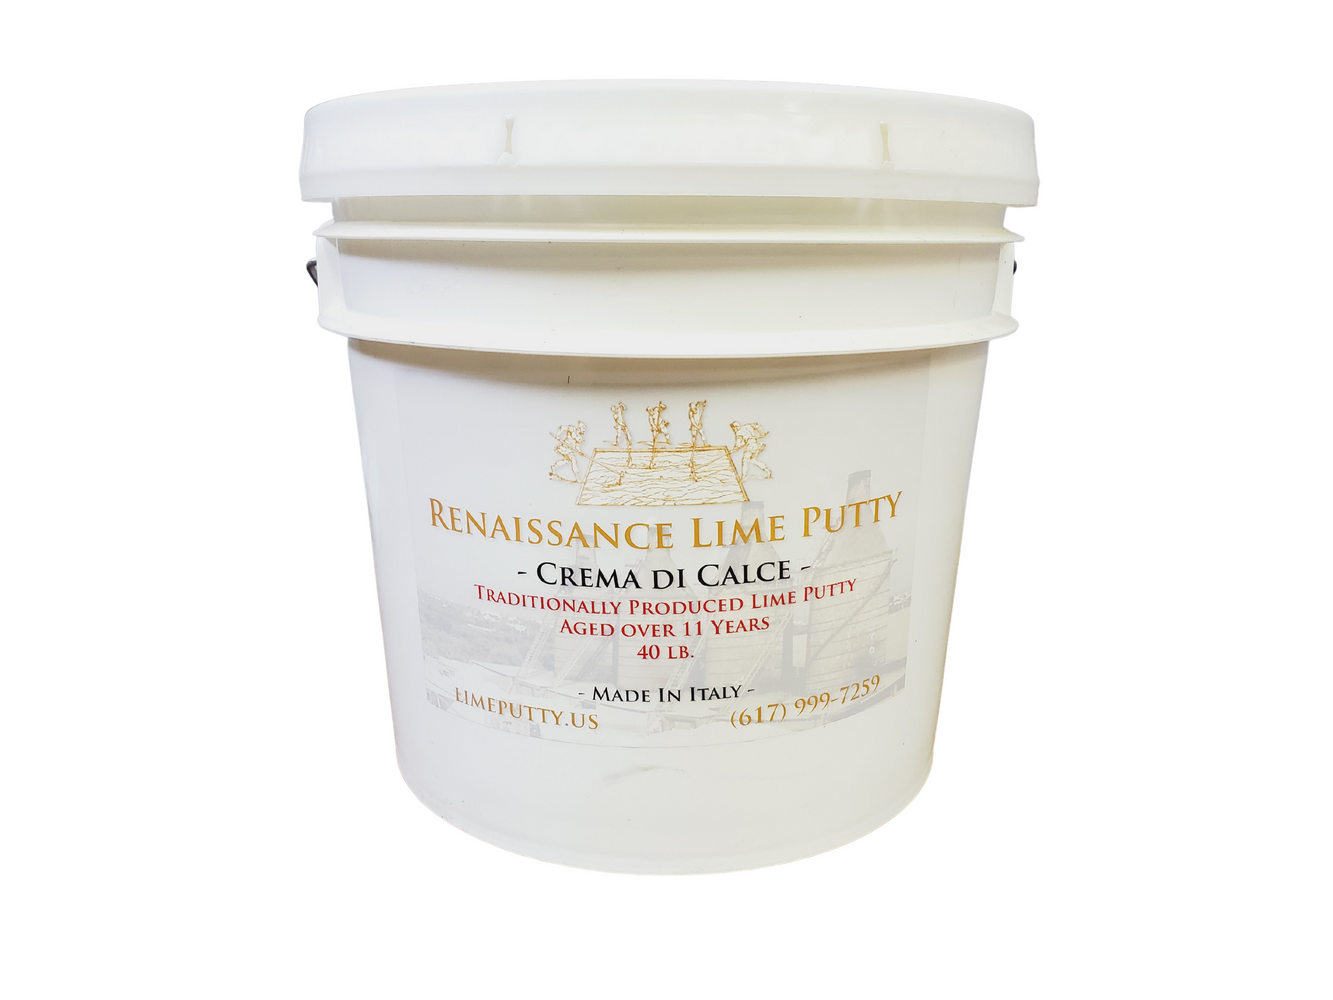 Crema Di Calce 40 lbs - Aged over 11 years-Renaissance Lime Putty-Atlas Preservation